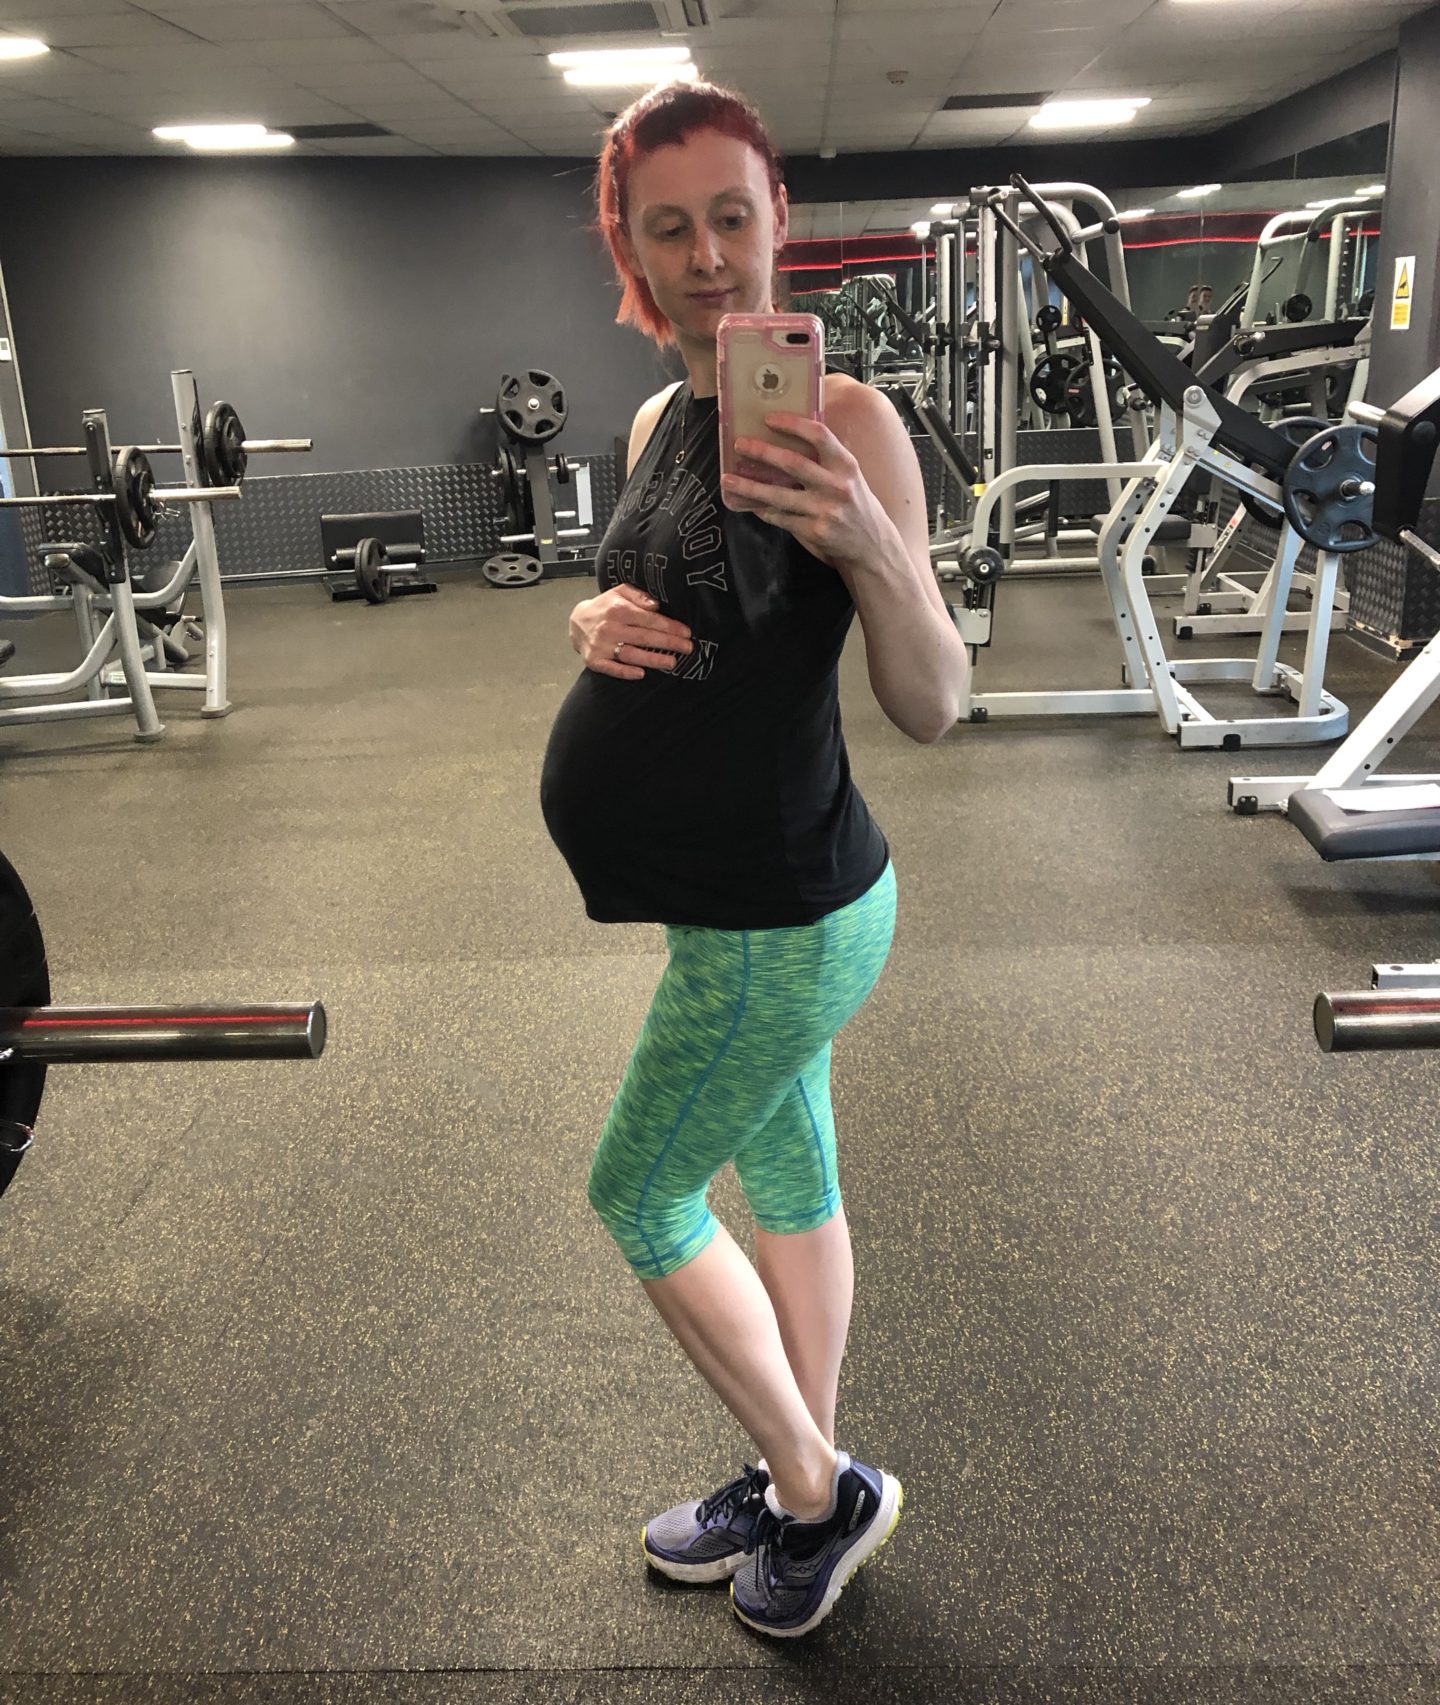 38 weeks pregnant girl in the gym